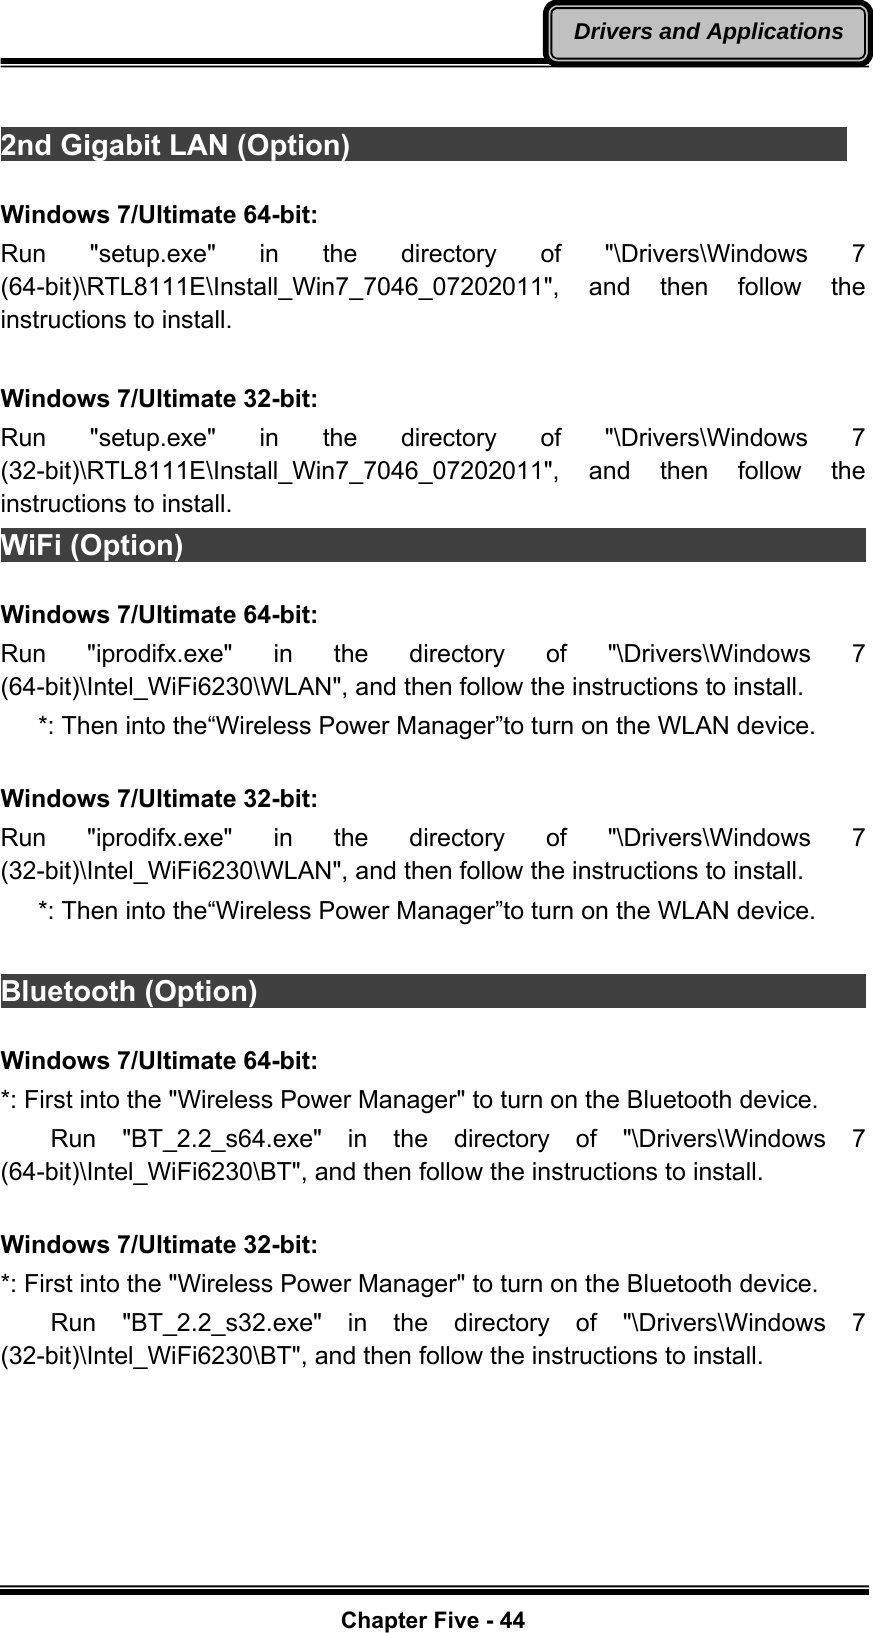   Chapter Five - 44Drivers and Applications 2nd Gigabit LAN (Option)                                    Windows 7/Ultimate 64-bit: Run &quot;setup.exe&quot; in the directory of &quot;\Drivers\Windows 7 (64-bit)\RTL8111E\Install_Win7_7046_07202011&quot;, and then follow the instructions to install.  Windows 7/Ultimate 32-bit: Run &quot;setup.exe&quot; in the directory of &quot;\Drivers\Windows 7 (32-bit)\RTL8111E\Install_Win7_7046_07202011&quot;, and then follow the instructions to install. WiFi (Option)                                                             Windows 7/Ultimate 64-bit: Run &quot;iprodifx.exe&quot; in the directory of &quot;\Drivers\Windows 7 (64-bit)\Intel_WiFi6230\WLAN&quot;, and then follow the instructions to install.    *: Then into the“Wireless Power Manager”to turn on the WLAN device.  Windows 7/Ultimate 32-bit: Run &quot;iprodifx.exe&quot; in the directory of &quot;\Drivers\Windows 7 (32-bit)\Intel_WiFi6230\WLAN&quot;, and then follow the instructions to install.    *: Then into the“Wireless Power Manager”to turn on the WLAN device.  Bluetooth (Option)                                                        Windows 7/Ultimate 64-bit: *: First into the &quot;Wireless Power Manager&quot; to turn on the Bluetooth device.     Run  &quot;BT_2.2_s64.exe&quot;  in  the directory of &quot;\Drivers\Windows 7 (64-bit)\Intel_WiFi6230\BT&quot;, and then follow the instructions to install.  Windows 7/Ultimate 32-bit: *: First into the &quot;Wireless Power Manager&quot; to turn on the Bluetooth device.     Run  &quot;BT_2.2_s32.exe&quot;  in  the directory of &quot;\Drivers\Windows 7 (32-bit)\Intel_WiFi6230\BT&quot;, and then follow the instructions to install. 